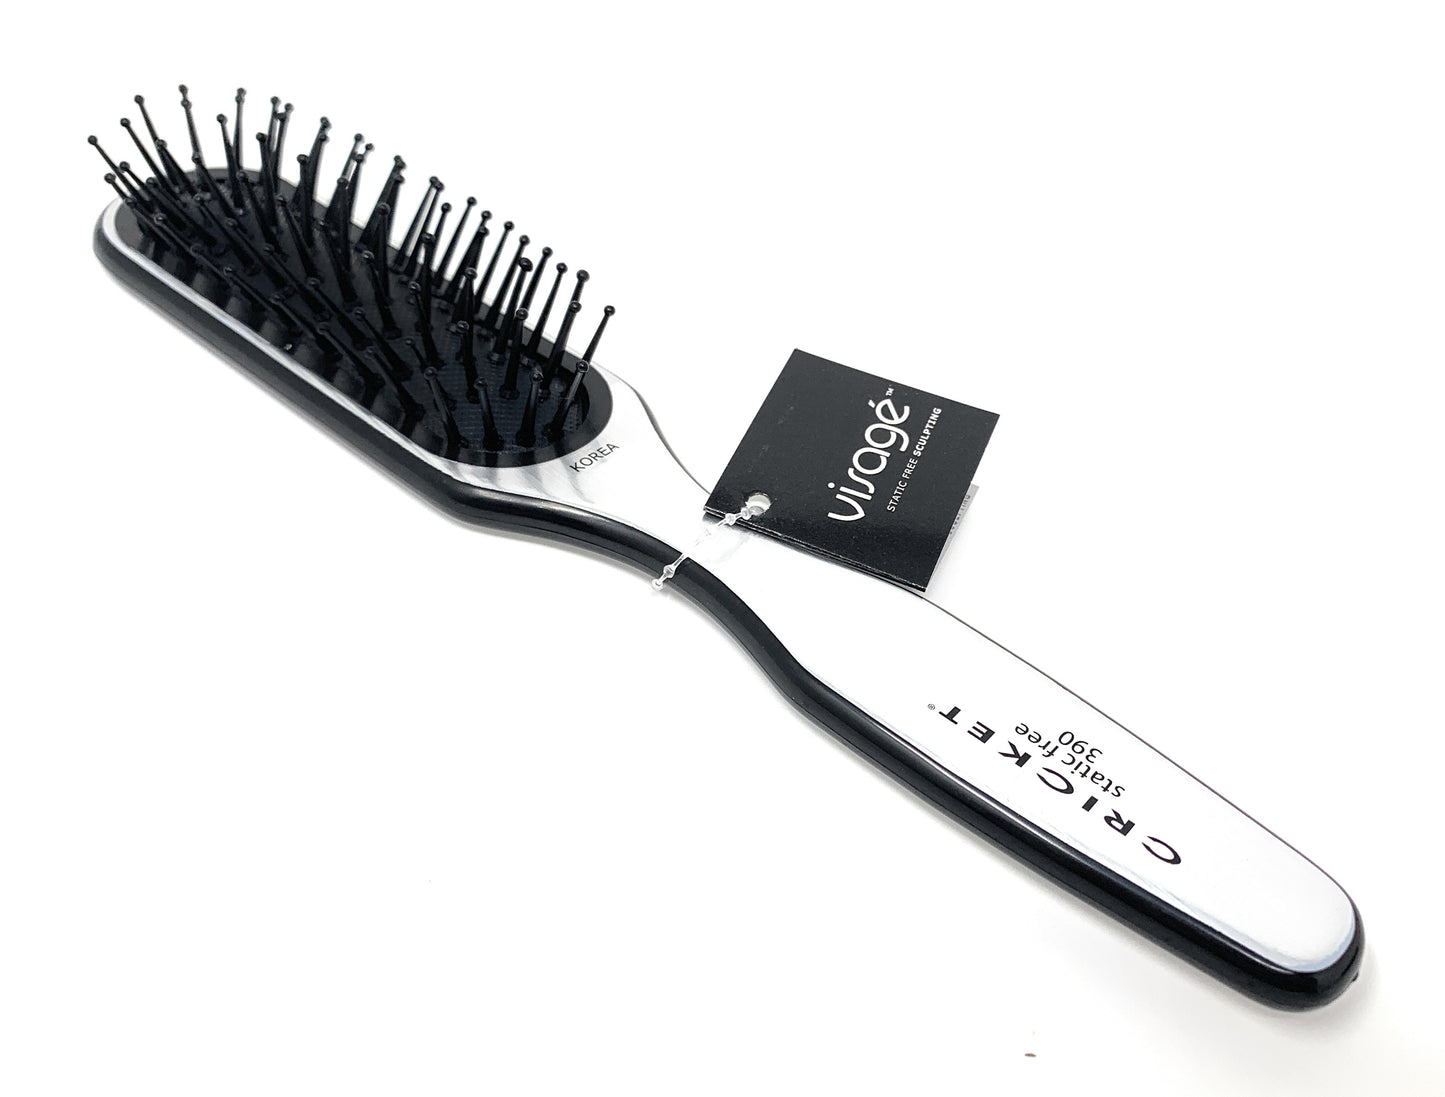 Cricket Visage #390 Static Free Sculpting Cushioned Hair Brush Unisex Silver Blk